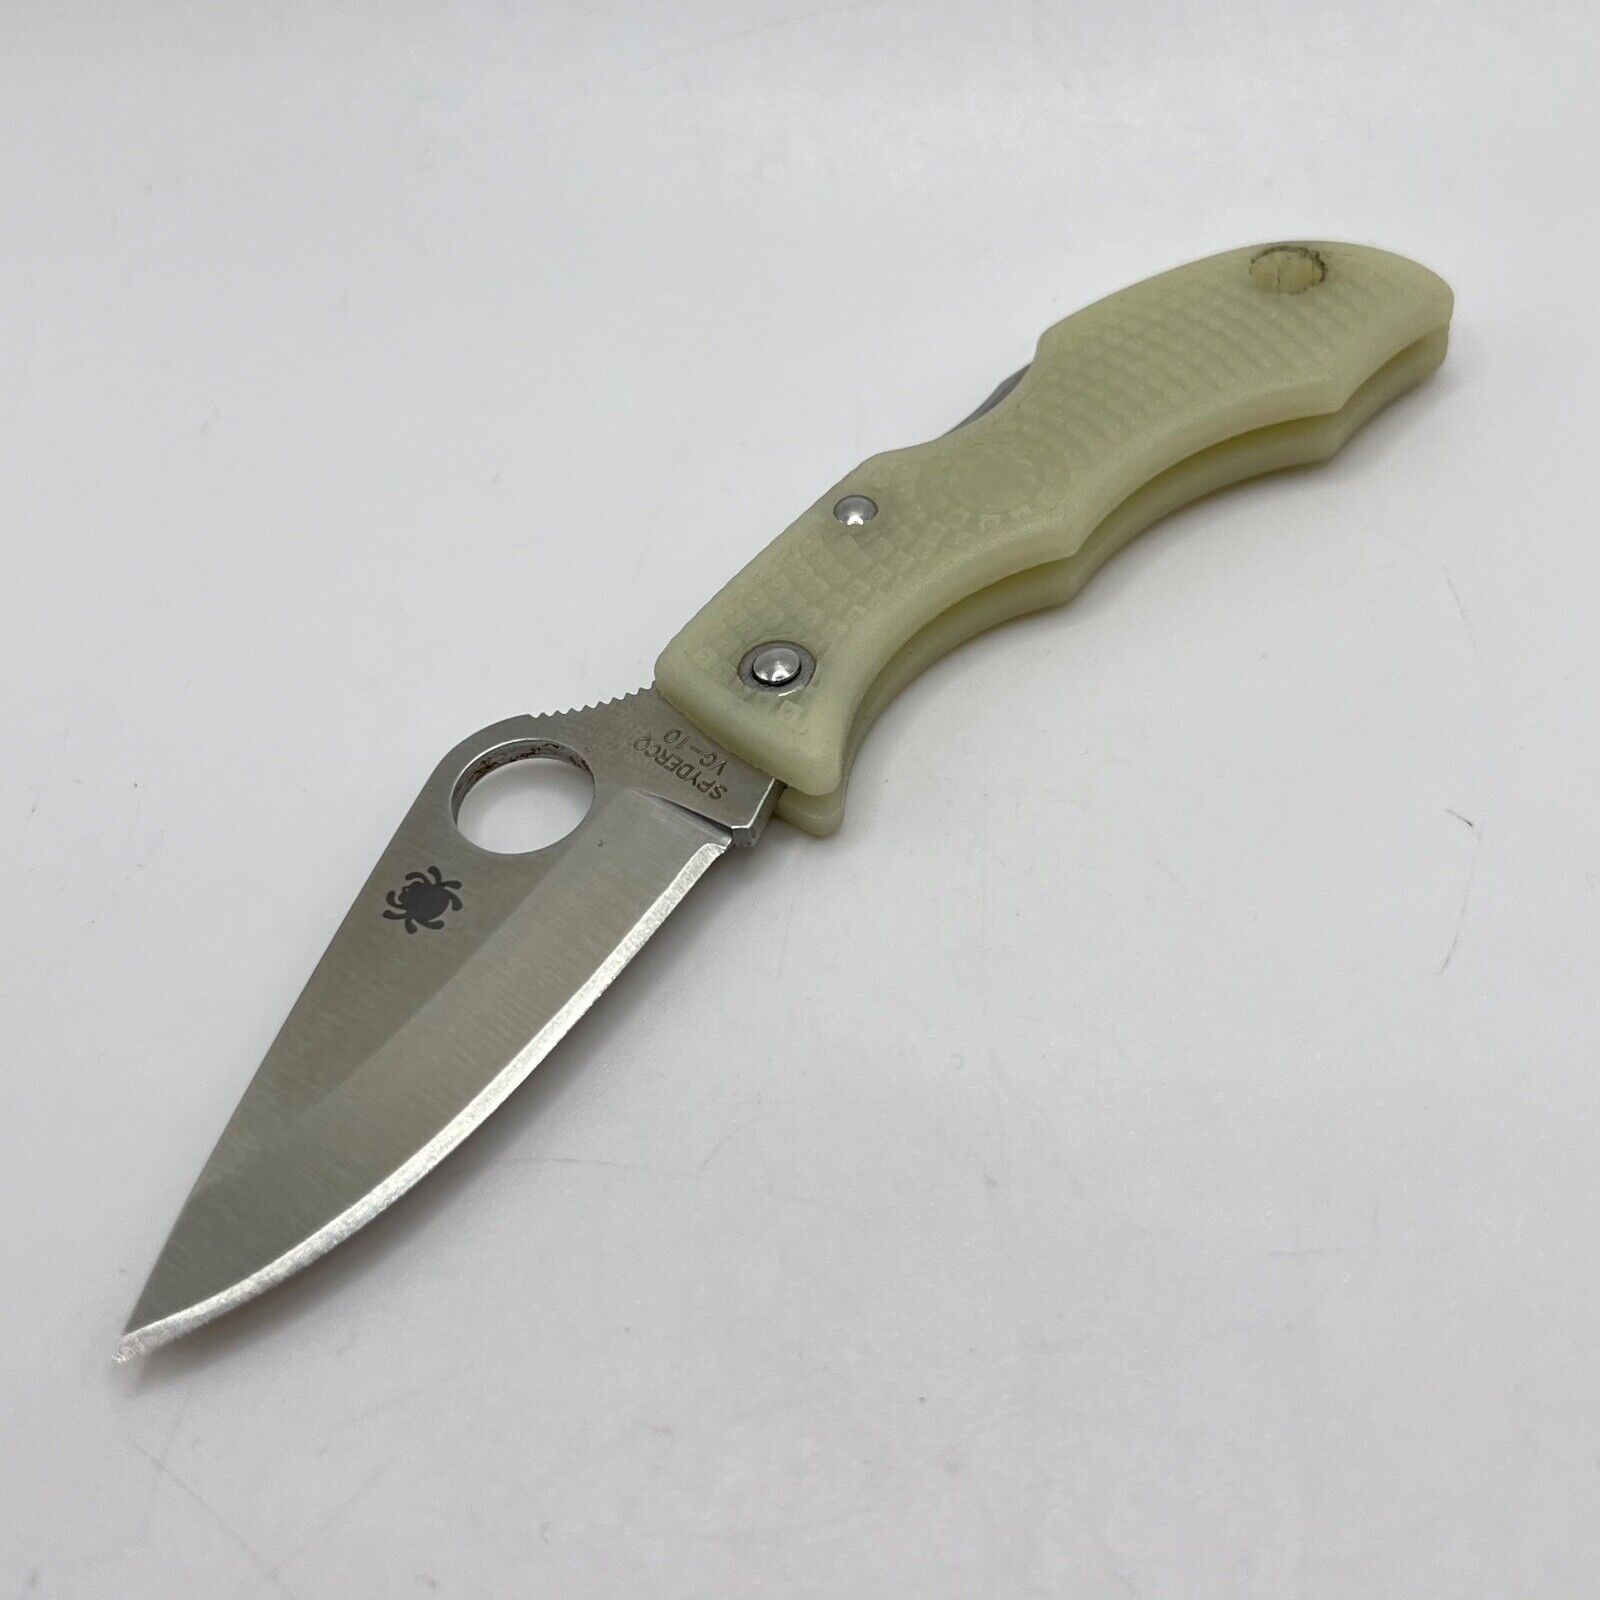 Spyderco Ladybug 3 Glow in the Dark LGITD3 Knife Rare Discontinued - Excellent